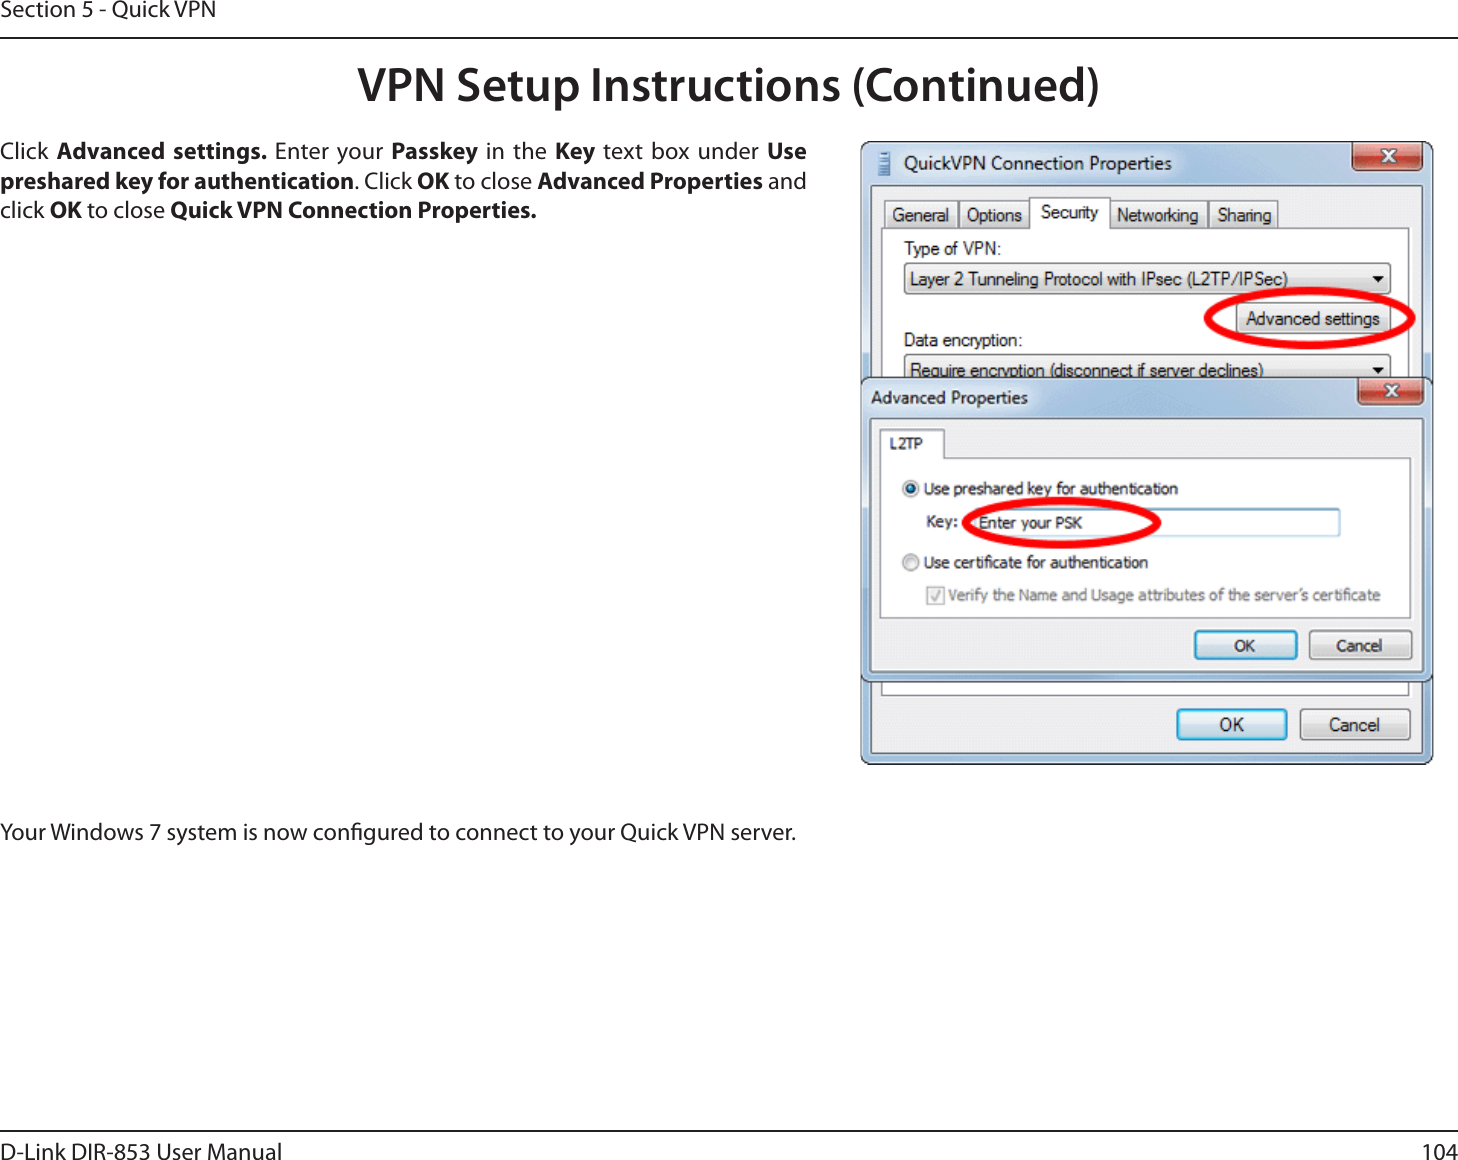 104D-Link DIR-853 User ManualSection 5 - Quick VPNYour Windows 7 system is now congured to connect to your Quick VPN server.Click Advanced settings. Enter your Passkey in the Key text box under Use preshared key for authentication. Click OK to close Advanced Properties and click OK to close Quick VPN Connection Properties.VPN Setup Instructions (Continued)